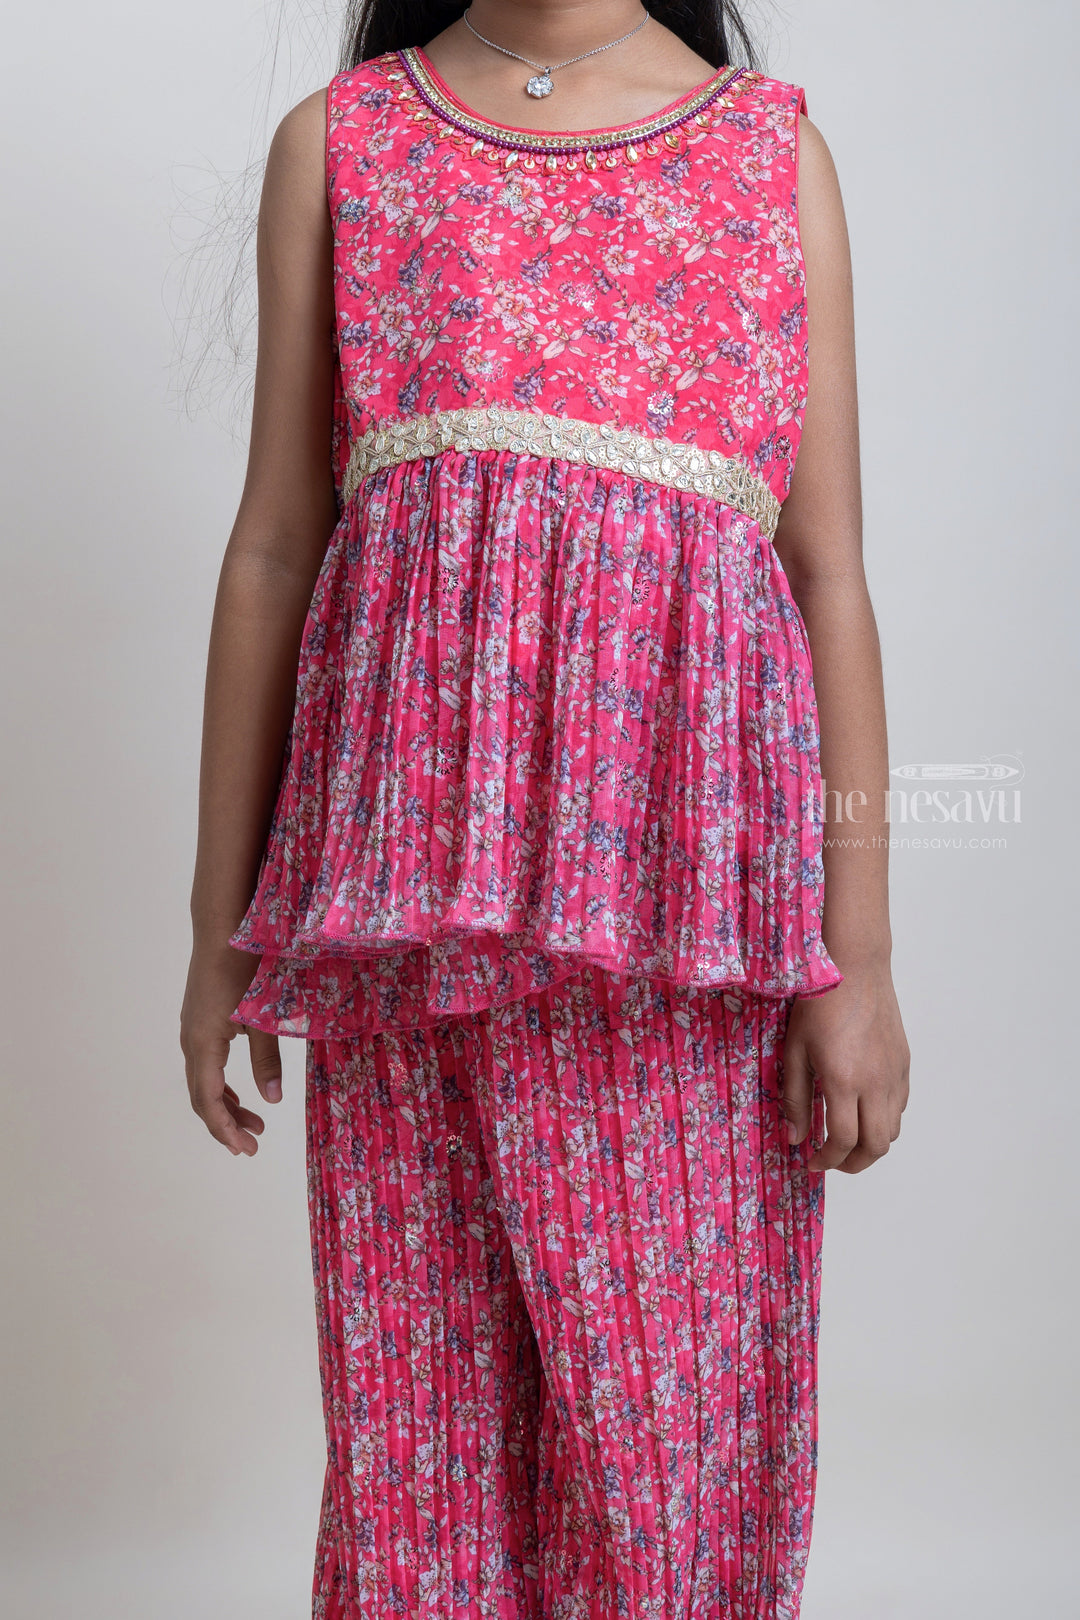 The Nesavu Girls Sharara / Plazo Set Attractive Pink Floral All Over Printed Tunic Top And Palazzo Suit For girls Nesavu Trendy Pink Palazzo Suit Set for Girls | New Fashion Dresses | The Nesavu